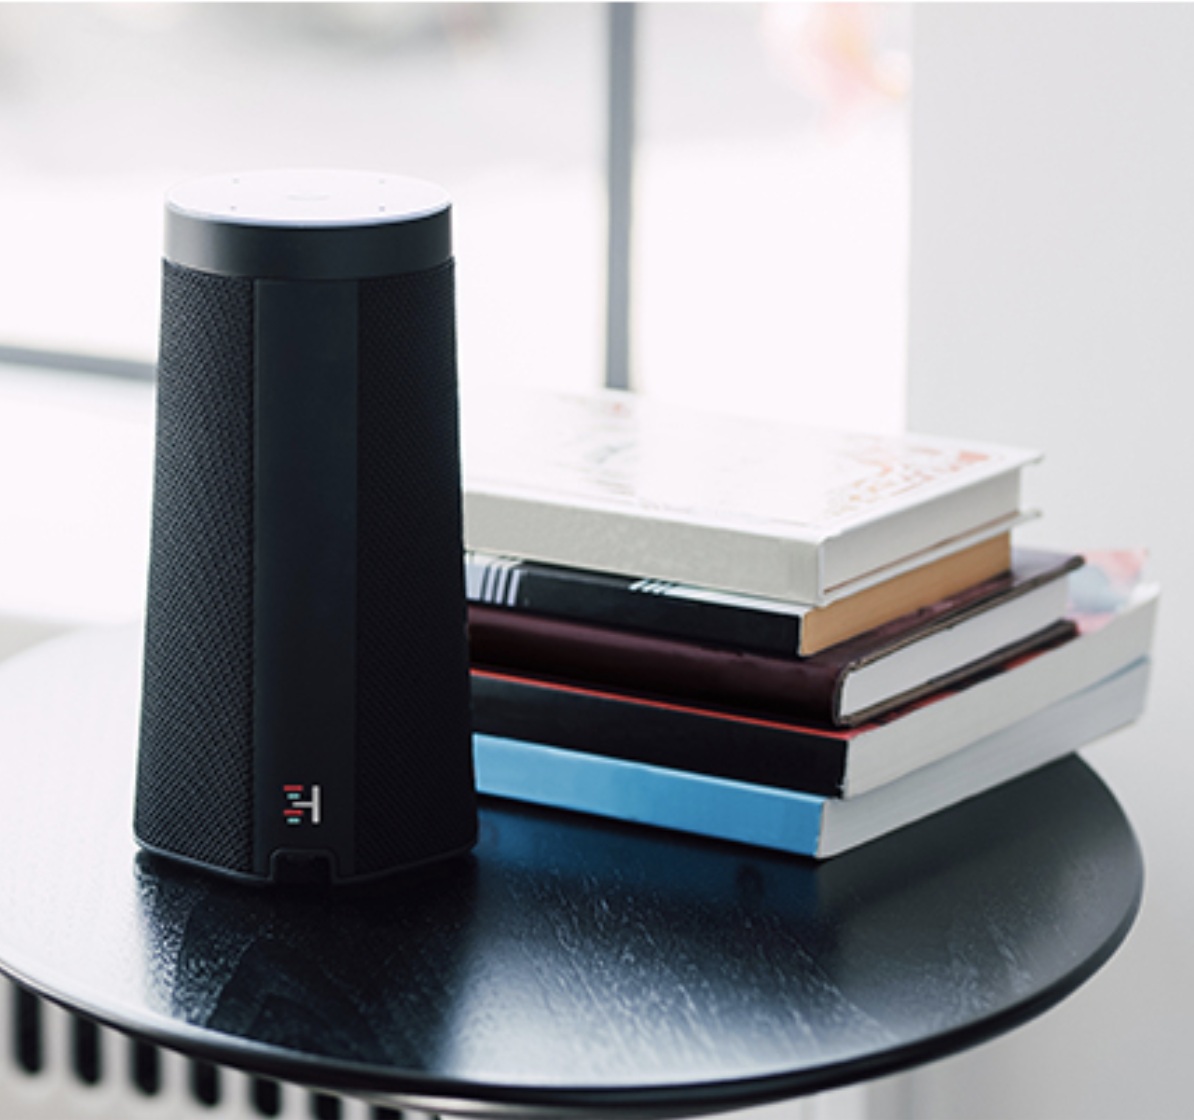 WellBe smart speaker on a side table next to a stack of books. 
